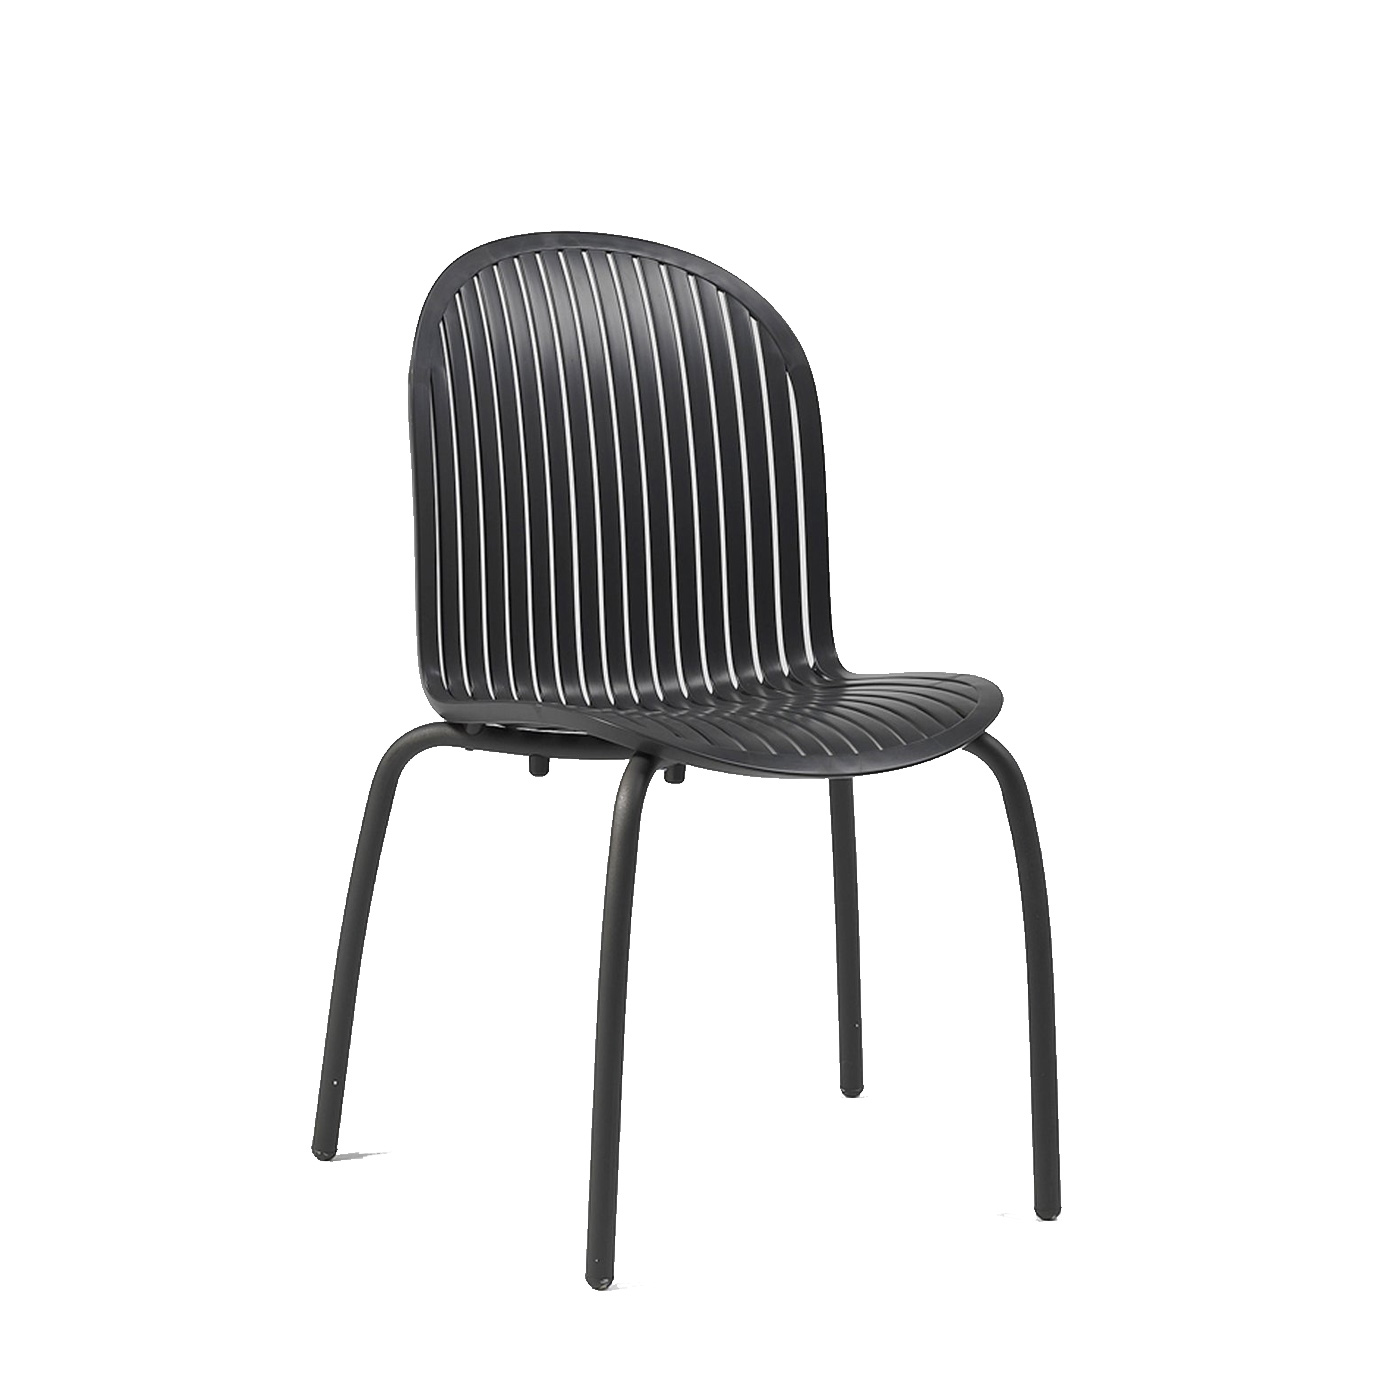 Chairs For Inside & Outdoor - Shop Garden Chairs By Nardi Outdoor